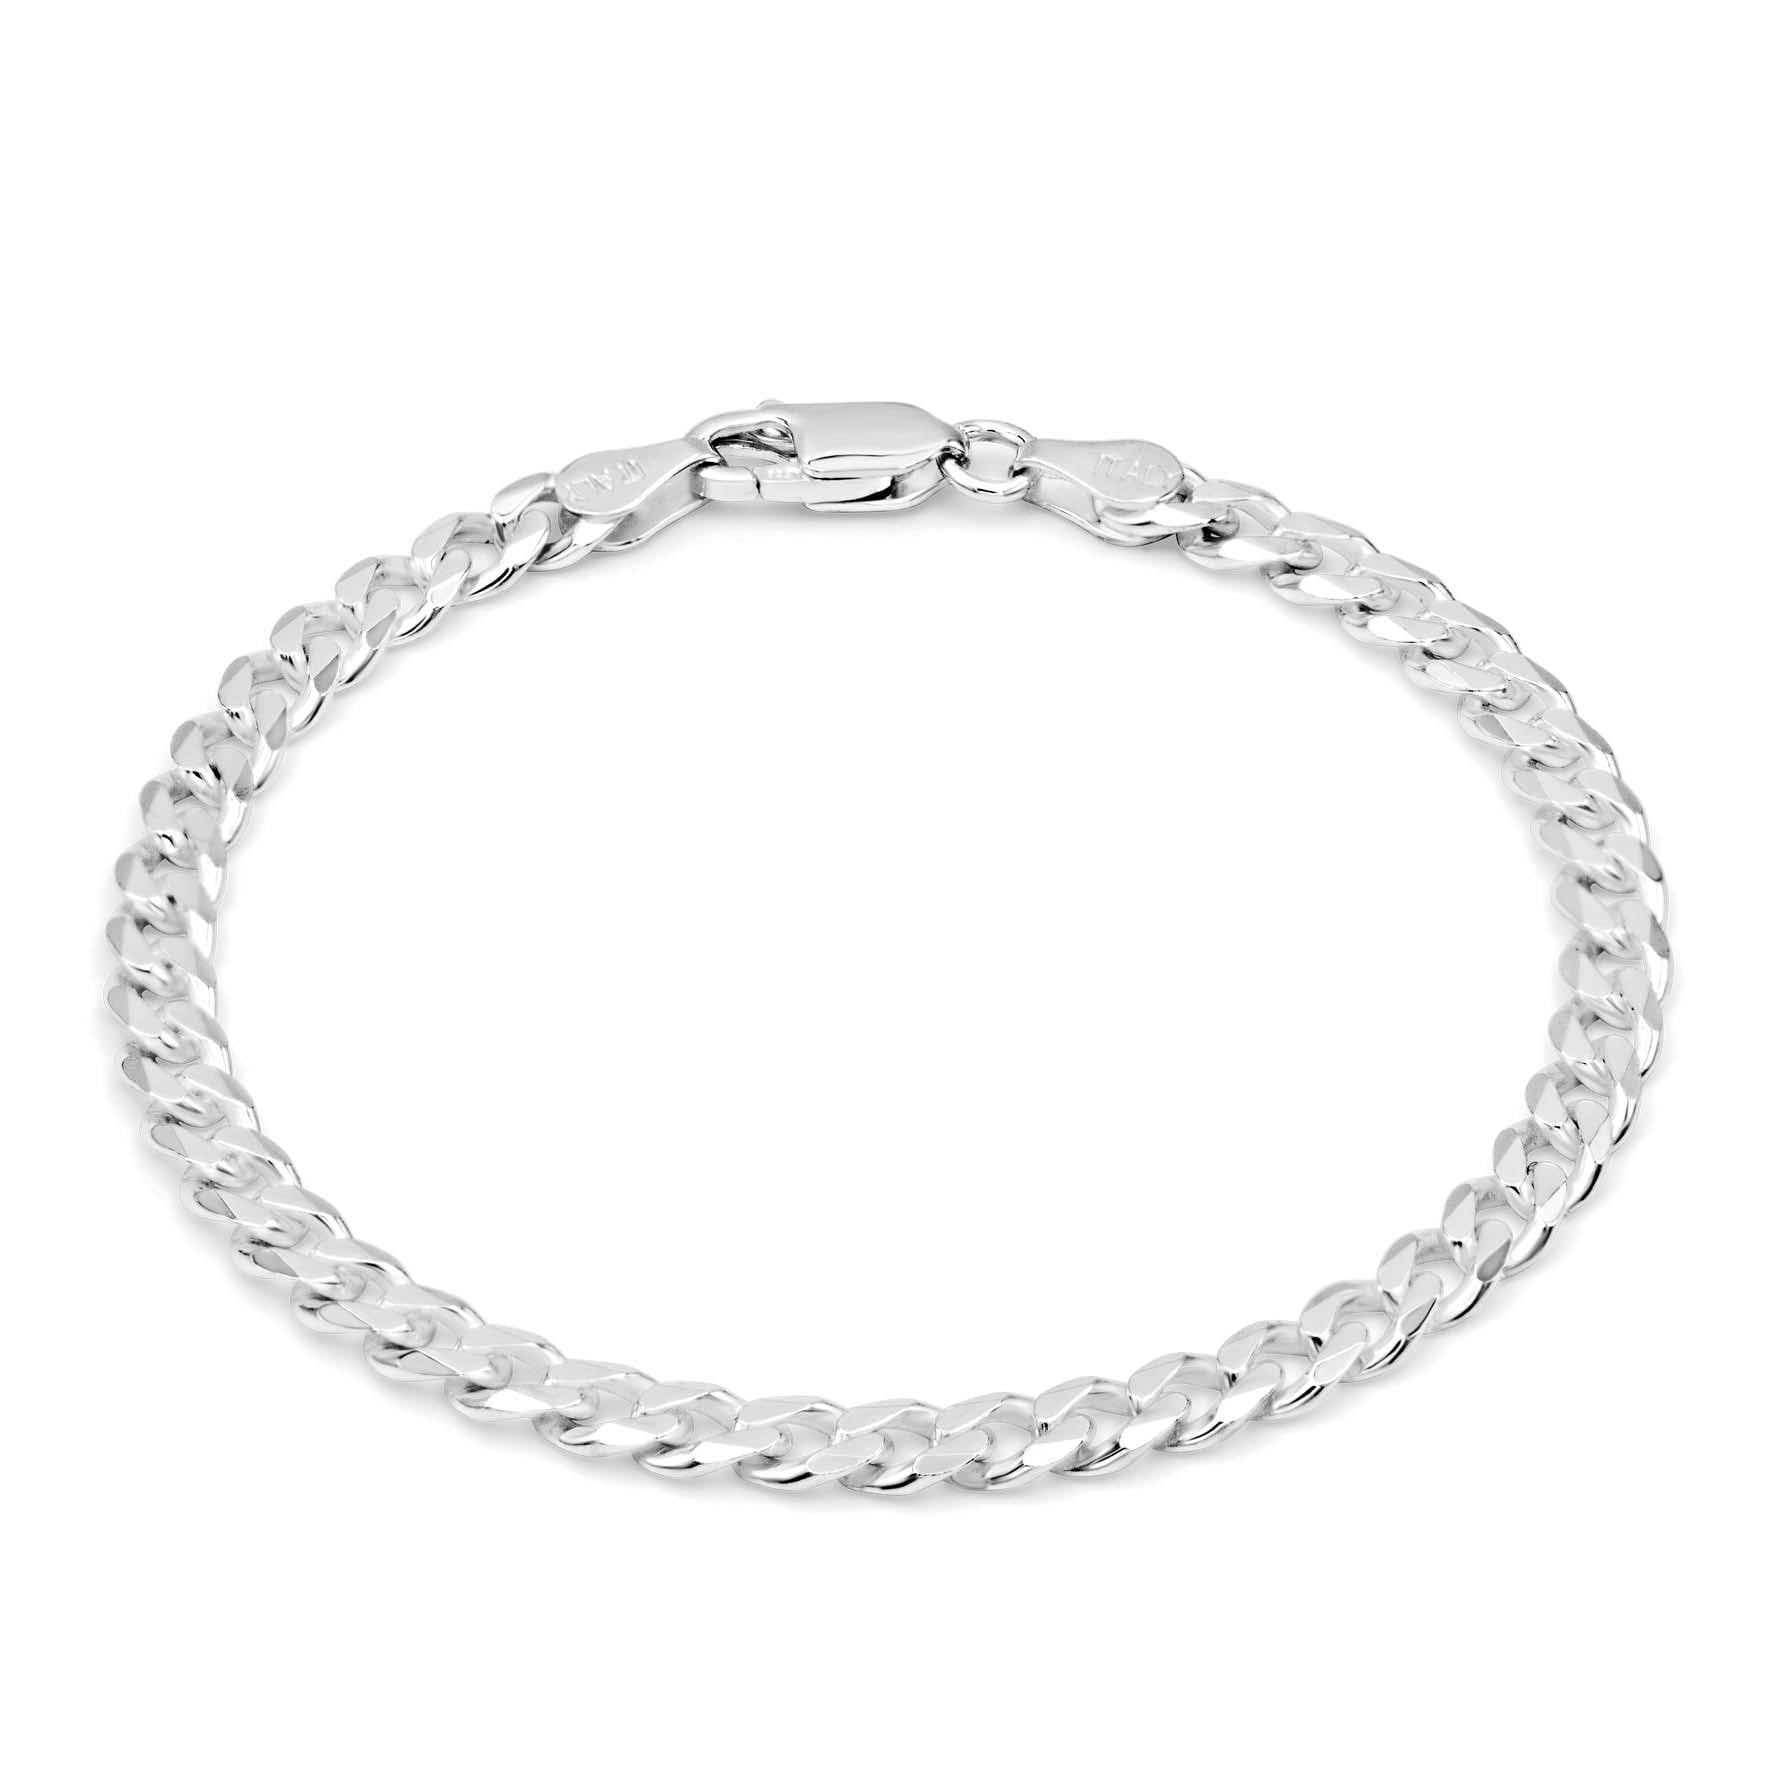 Details about   Solid 925 Sterling Silver Men's Italian 7mm Cuban Curb Link Chain Bracelet 